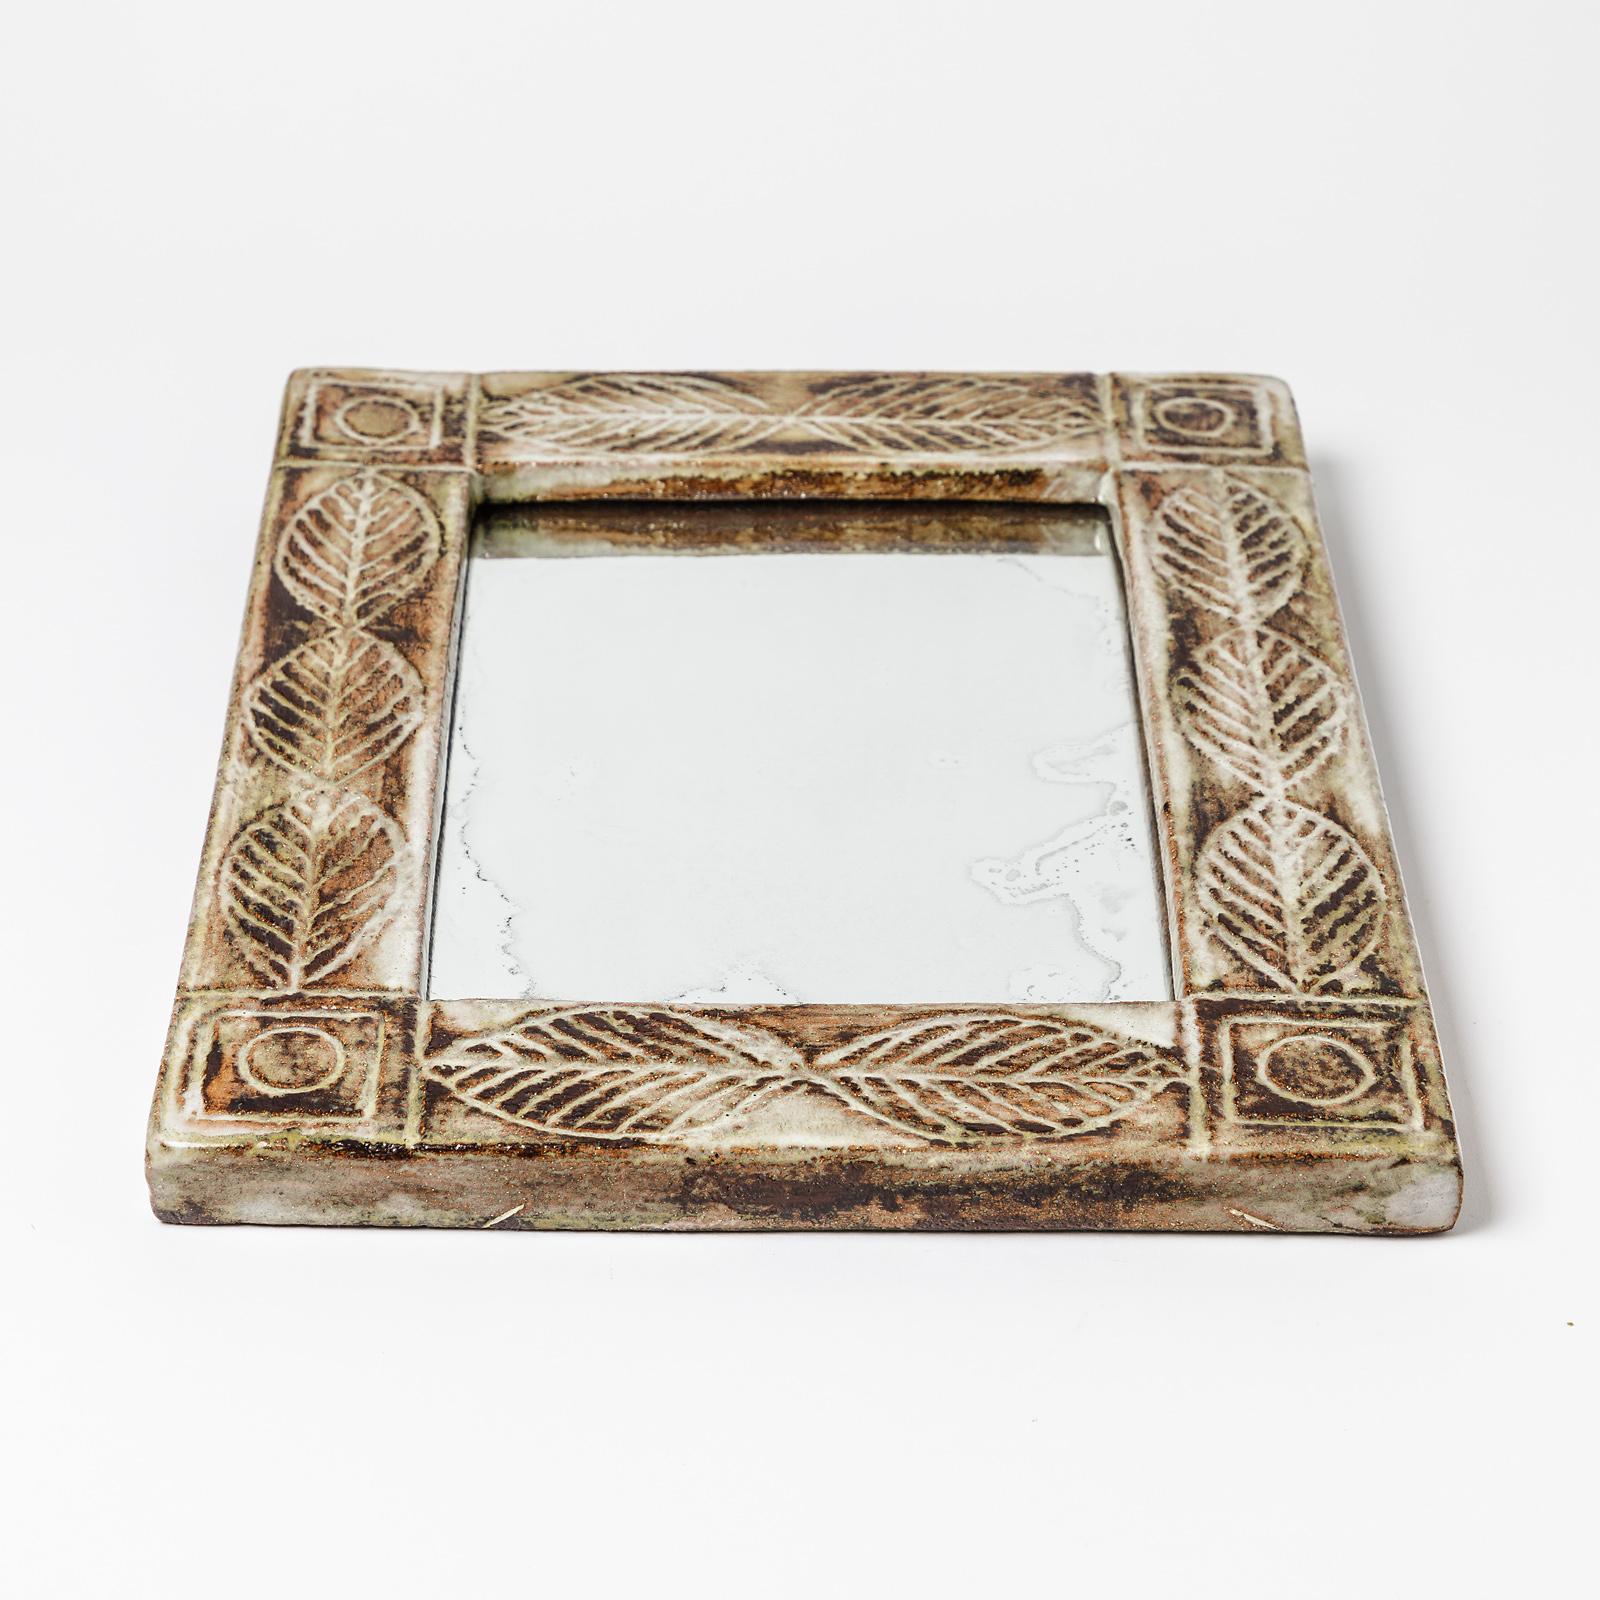 A ceramic mirror by Olivier Petit.
Perfect original conditions,
circa 1960-1970.
Dimensions (mirror only): 28.5 x 20 cm / 11' x 8' inches.